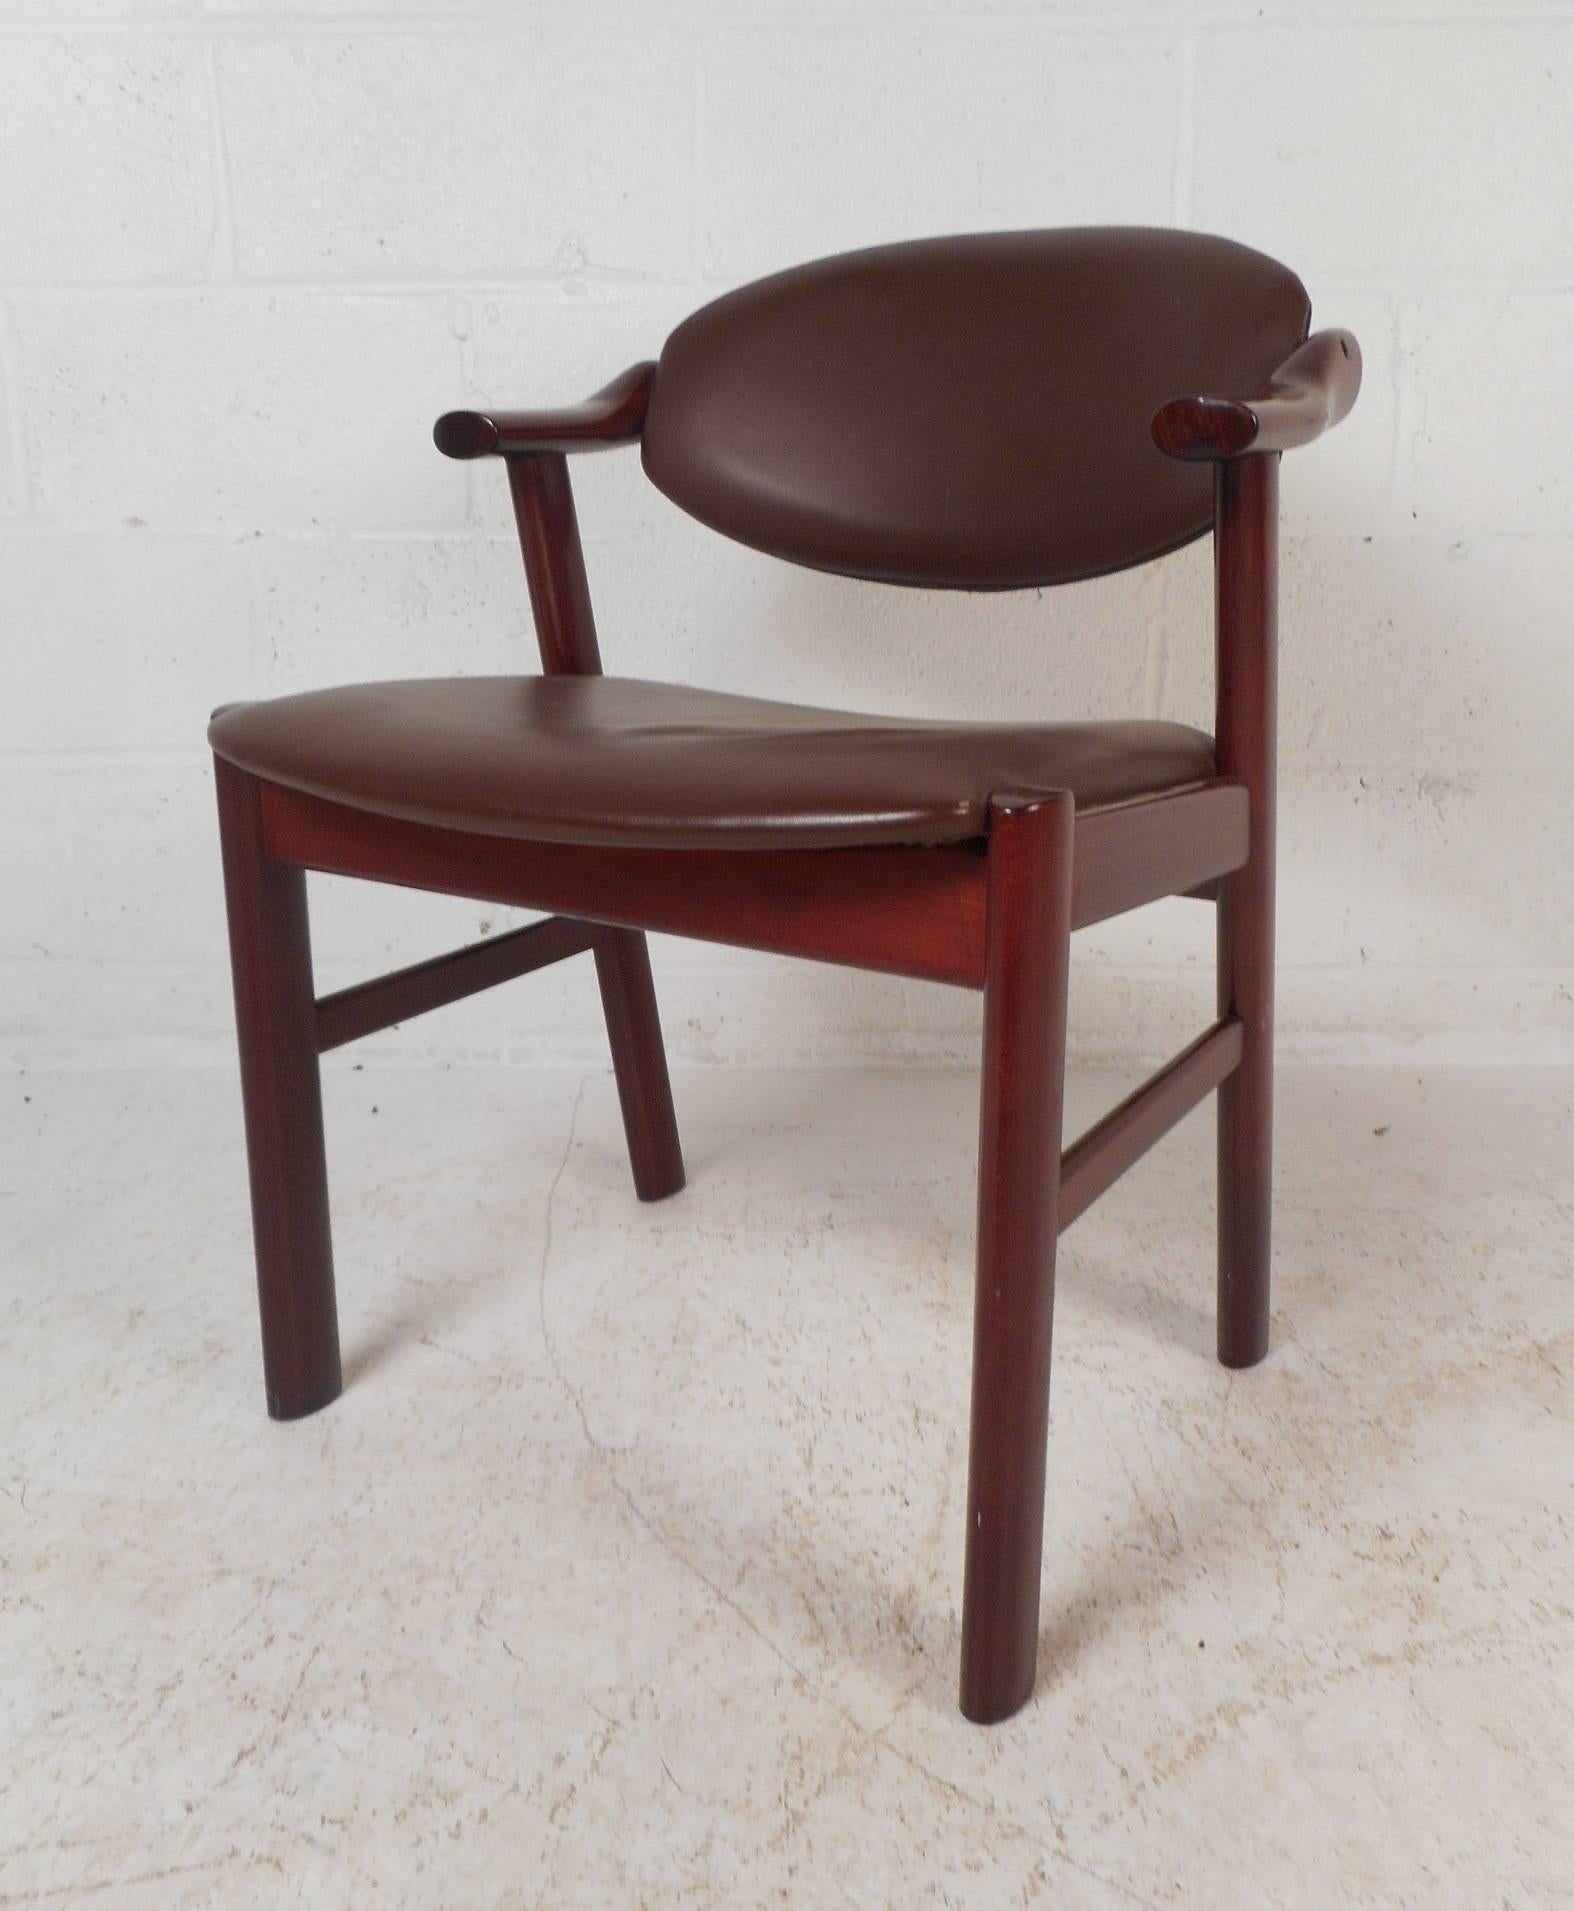 This lovely set of four vintage modern dining chairs feature angled back legs and high arm rests. Sleek design with a back rest that partially swivels to adjust to your back. Elegant dark wood grain on this solid and sculpted frame show quality